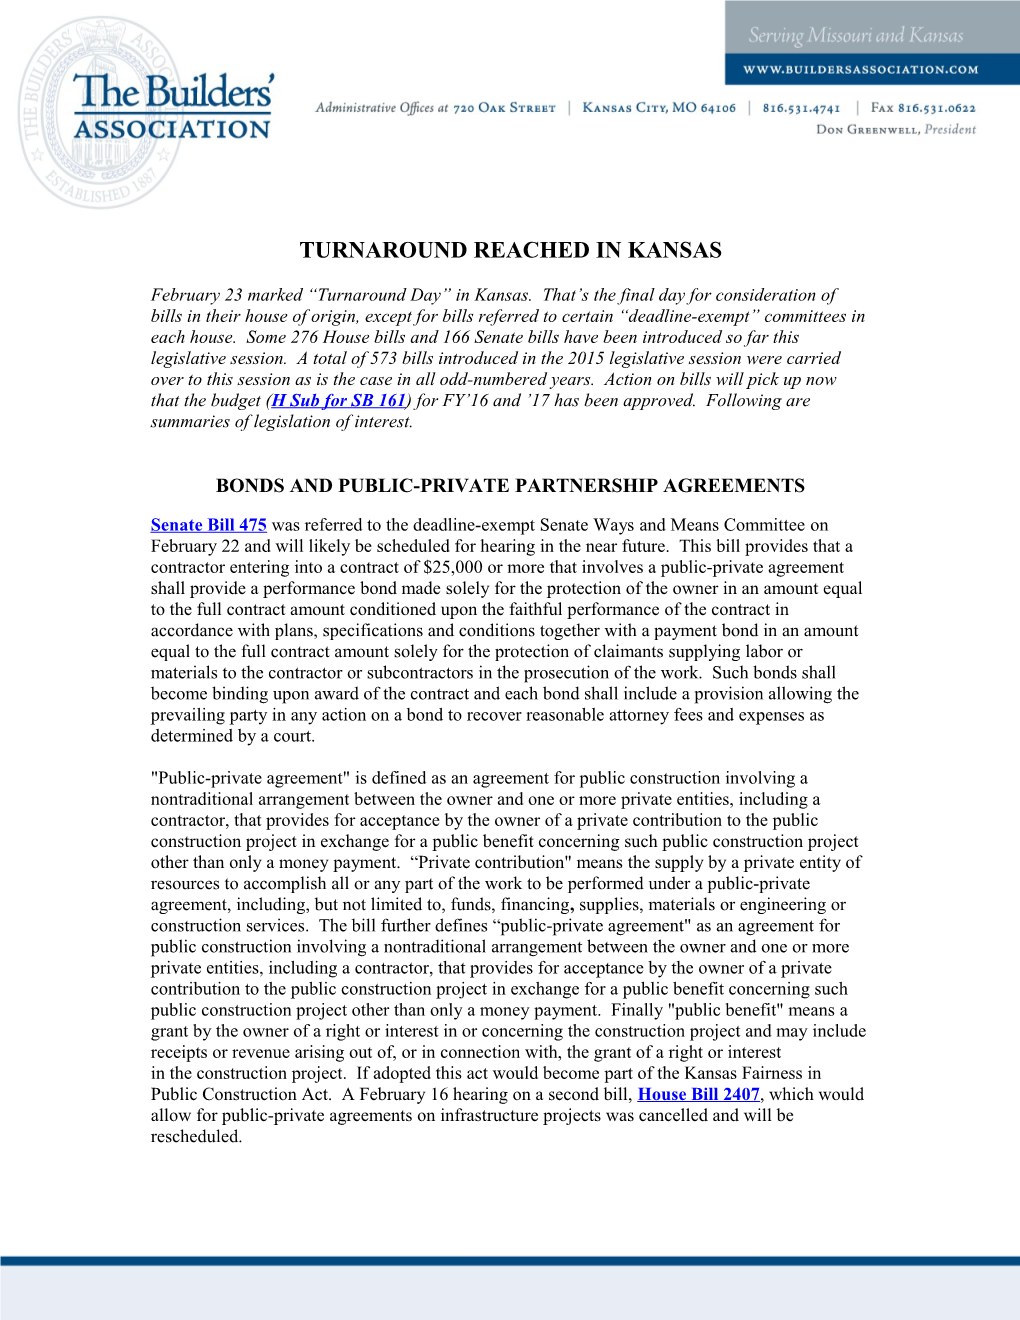 Bonds and Public-Private Partnership Agreements